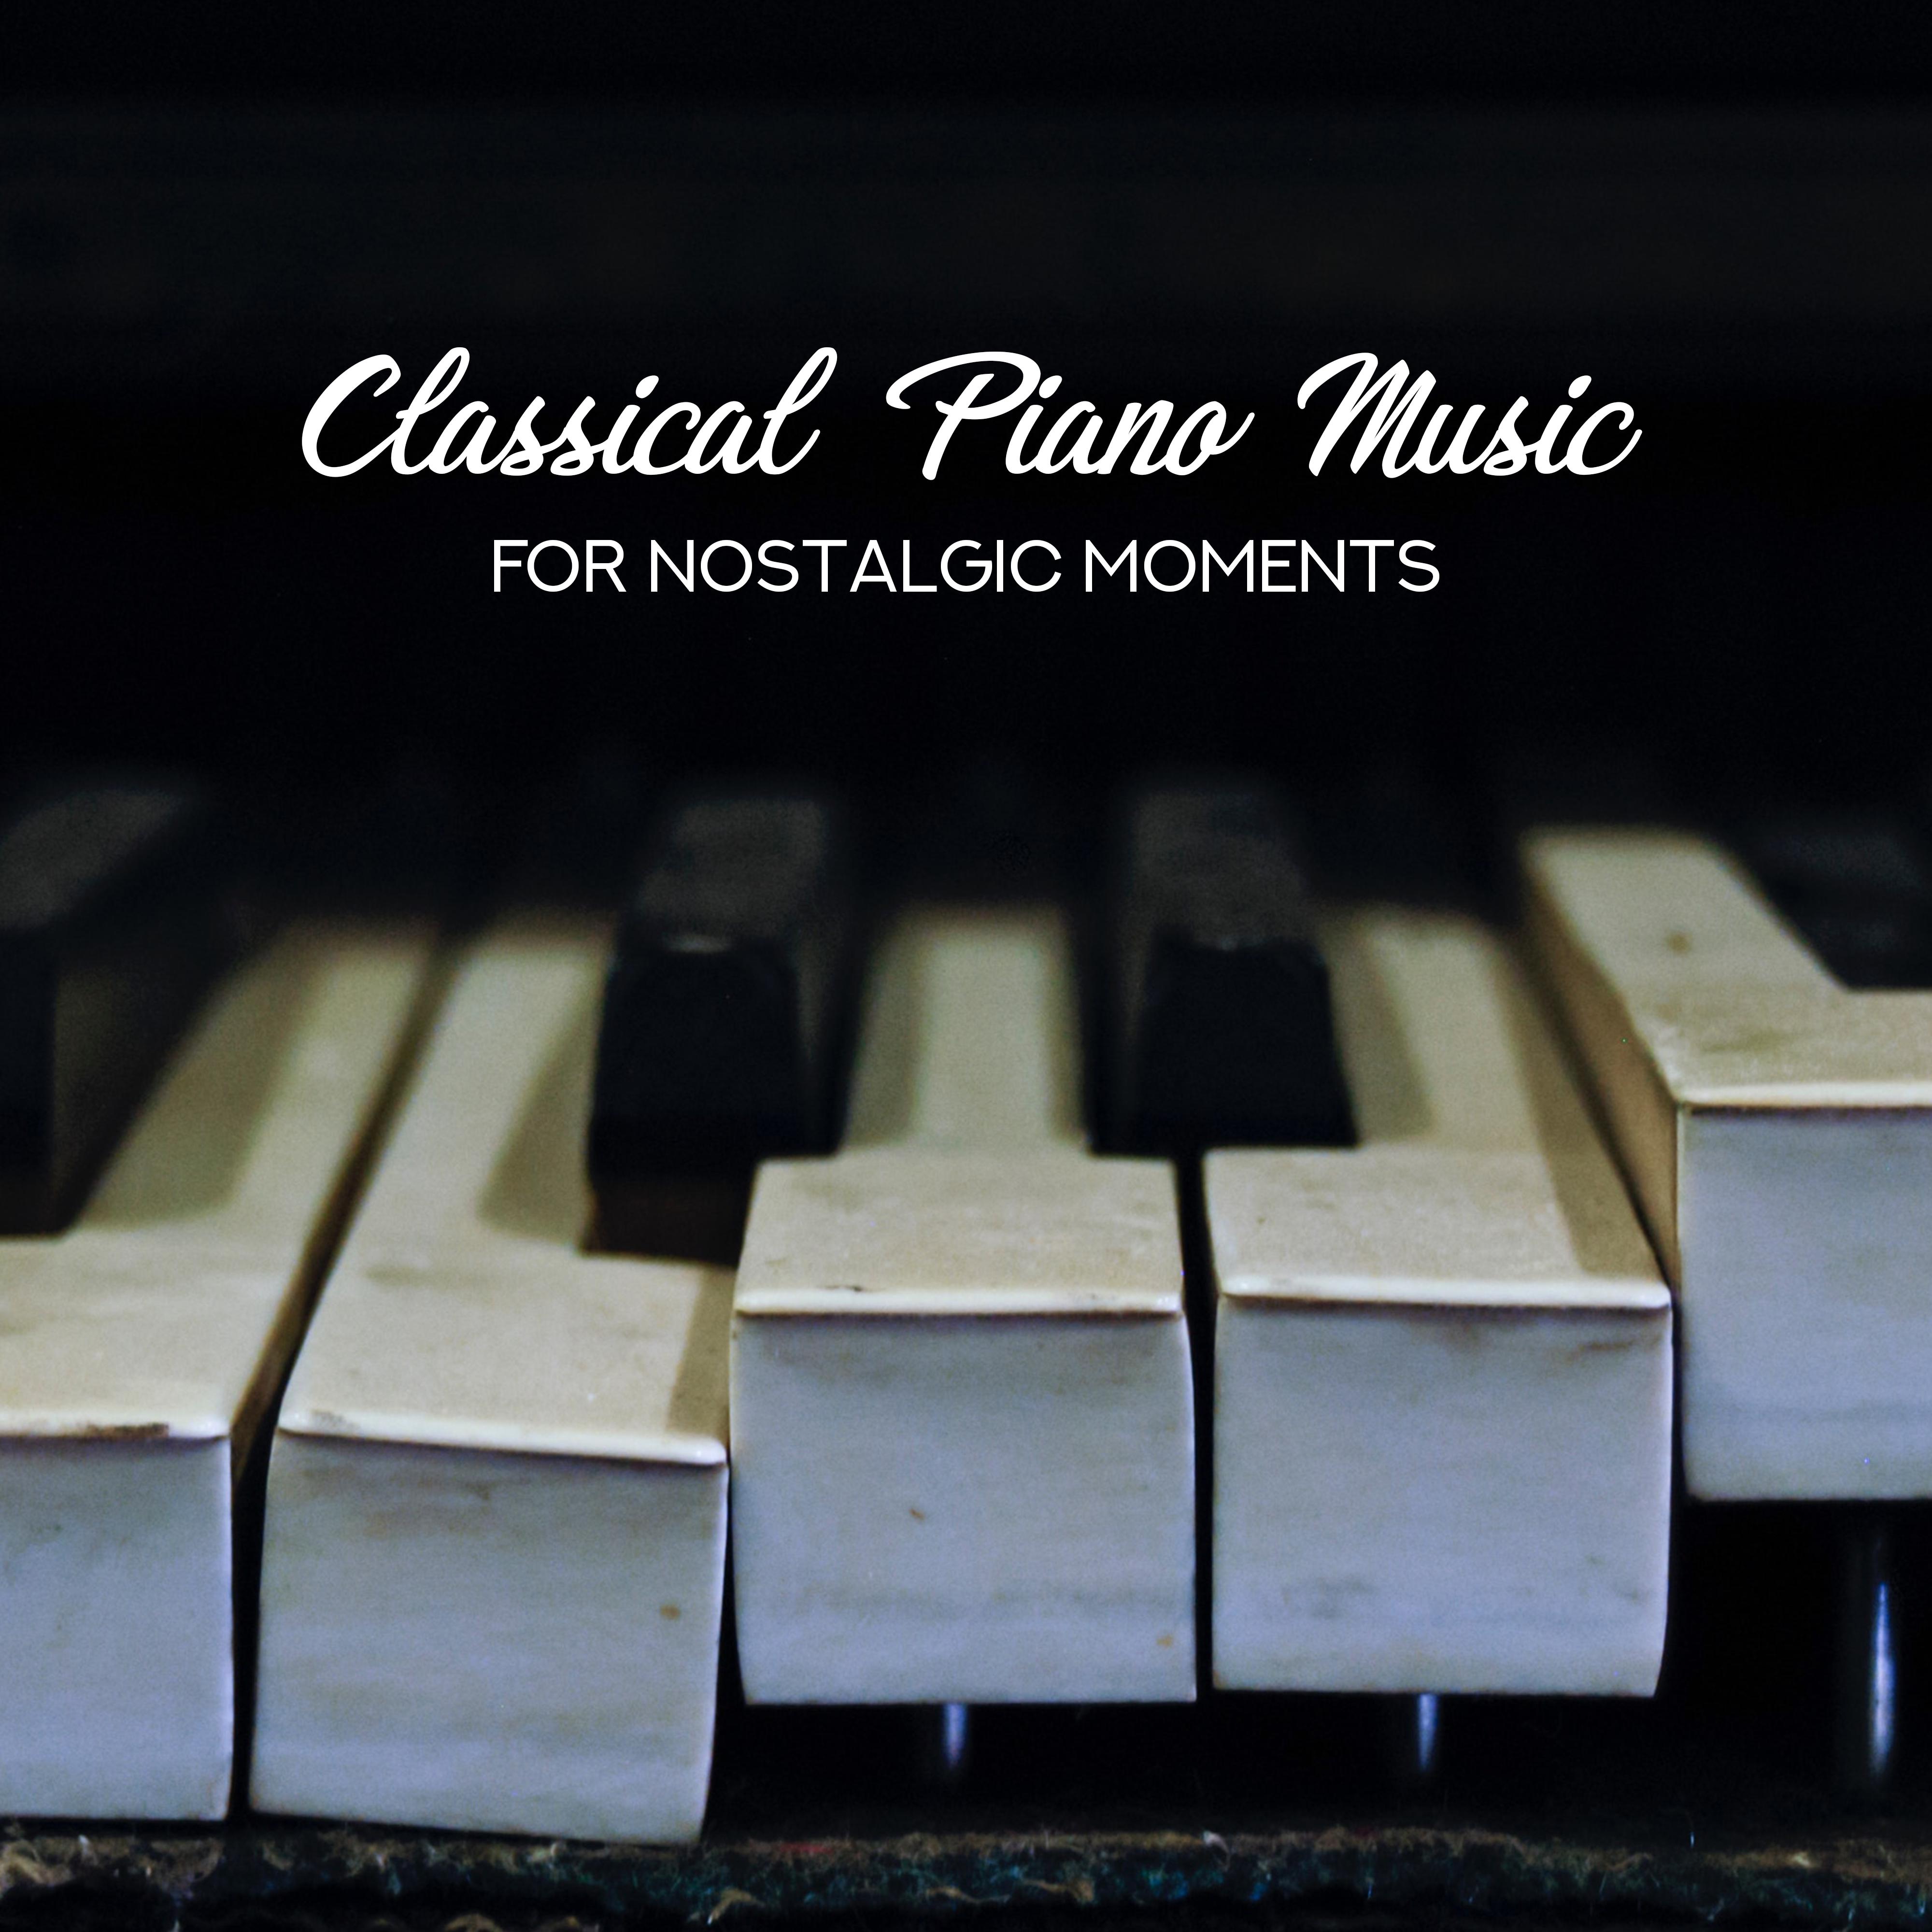 Classical Piano Music for Nostalgic Moments - 15 Most Beautiful Piano Ballads for Moments of Loneliness, Longing, Hopelessness, Sadness, Bad Mood and Depression